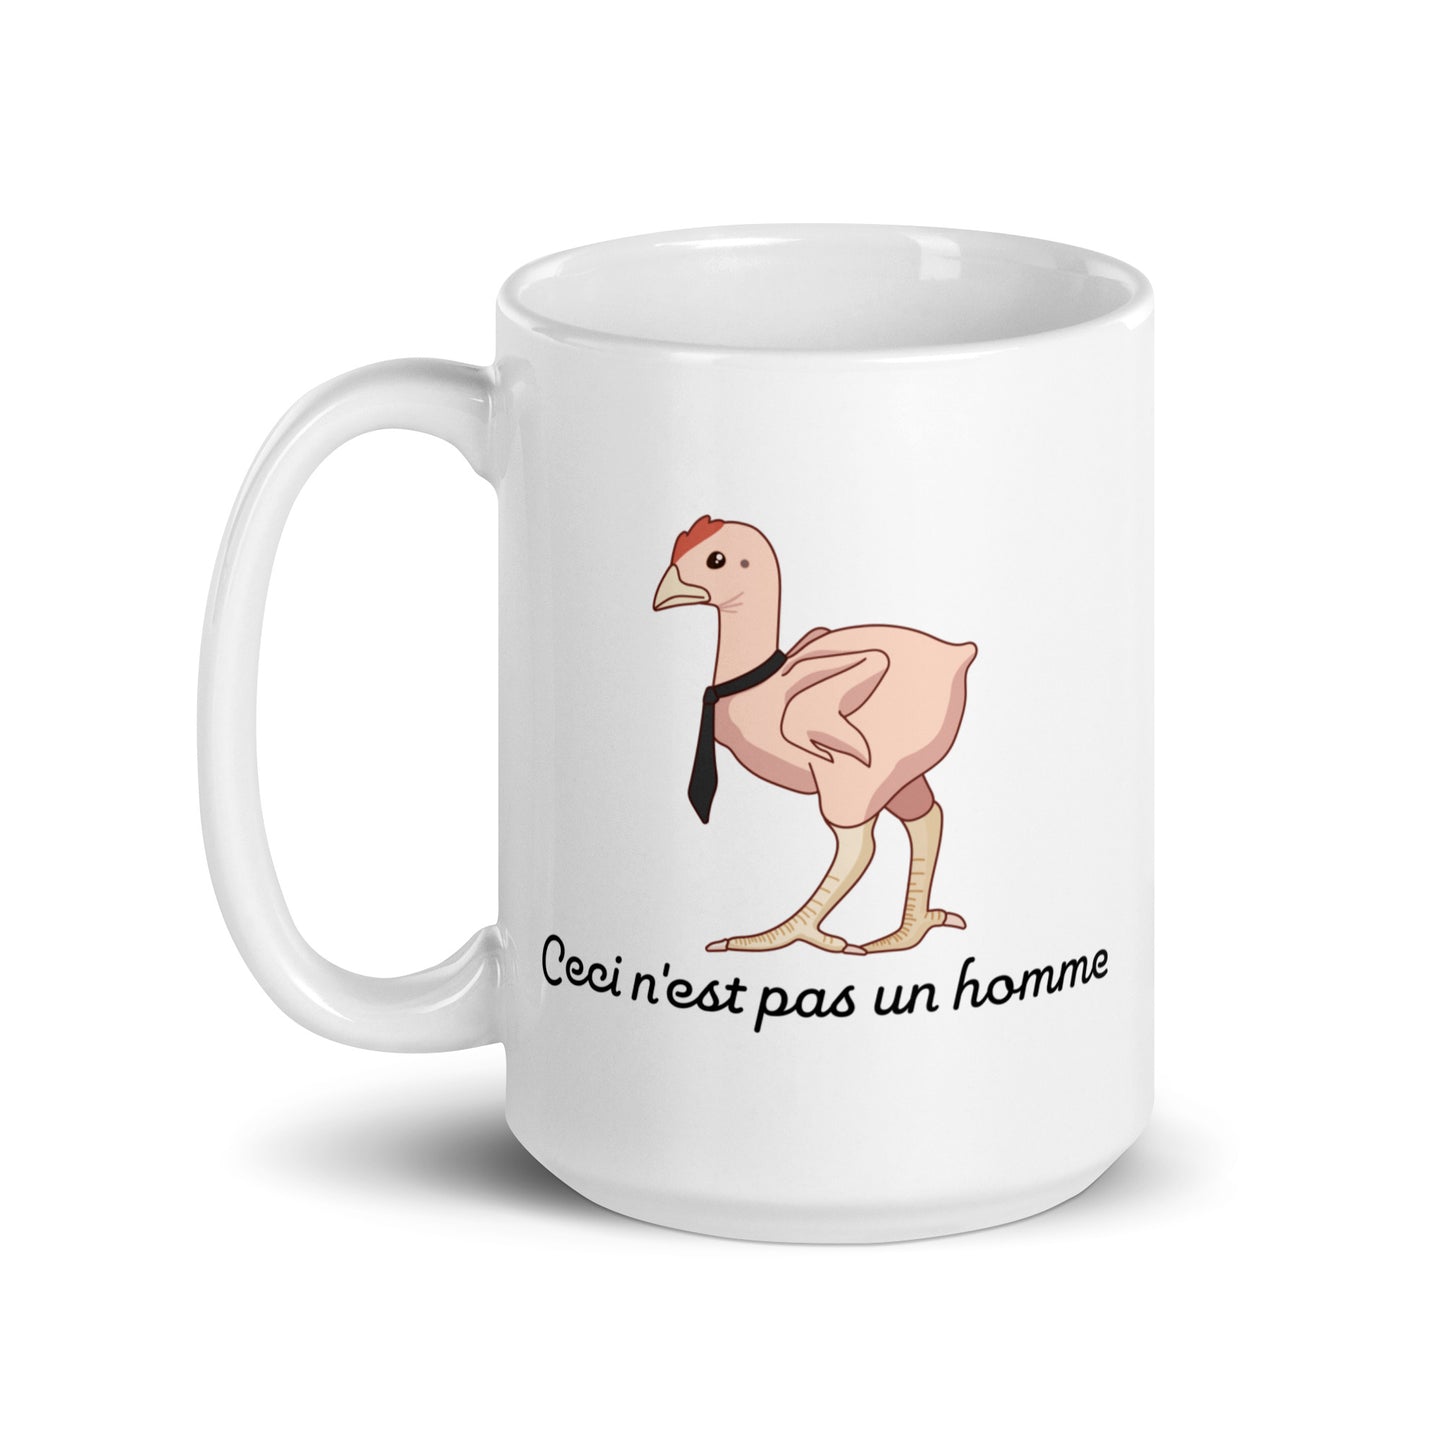 A 15 ounce ceramic mug featuring an illustration of a featherless chicken wearing a tie. Text underneath the chicken reads "Ceci n'est pas un homme" in a cursive font.